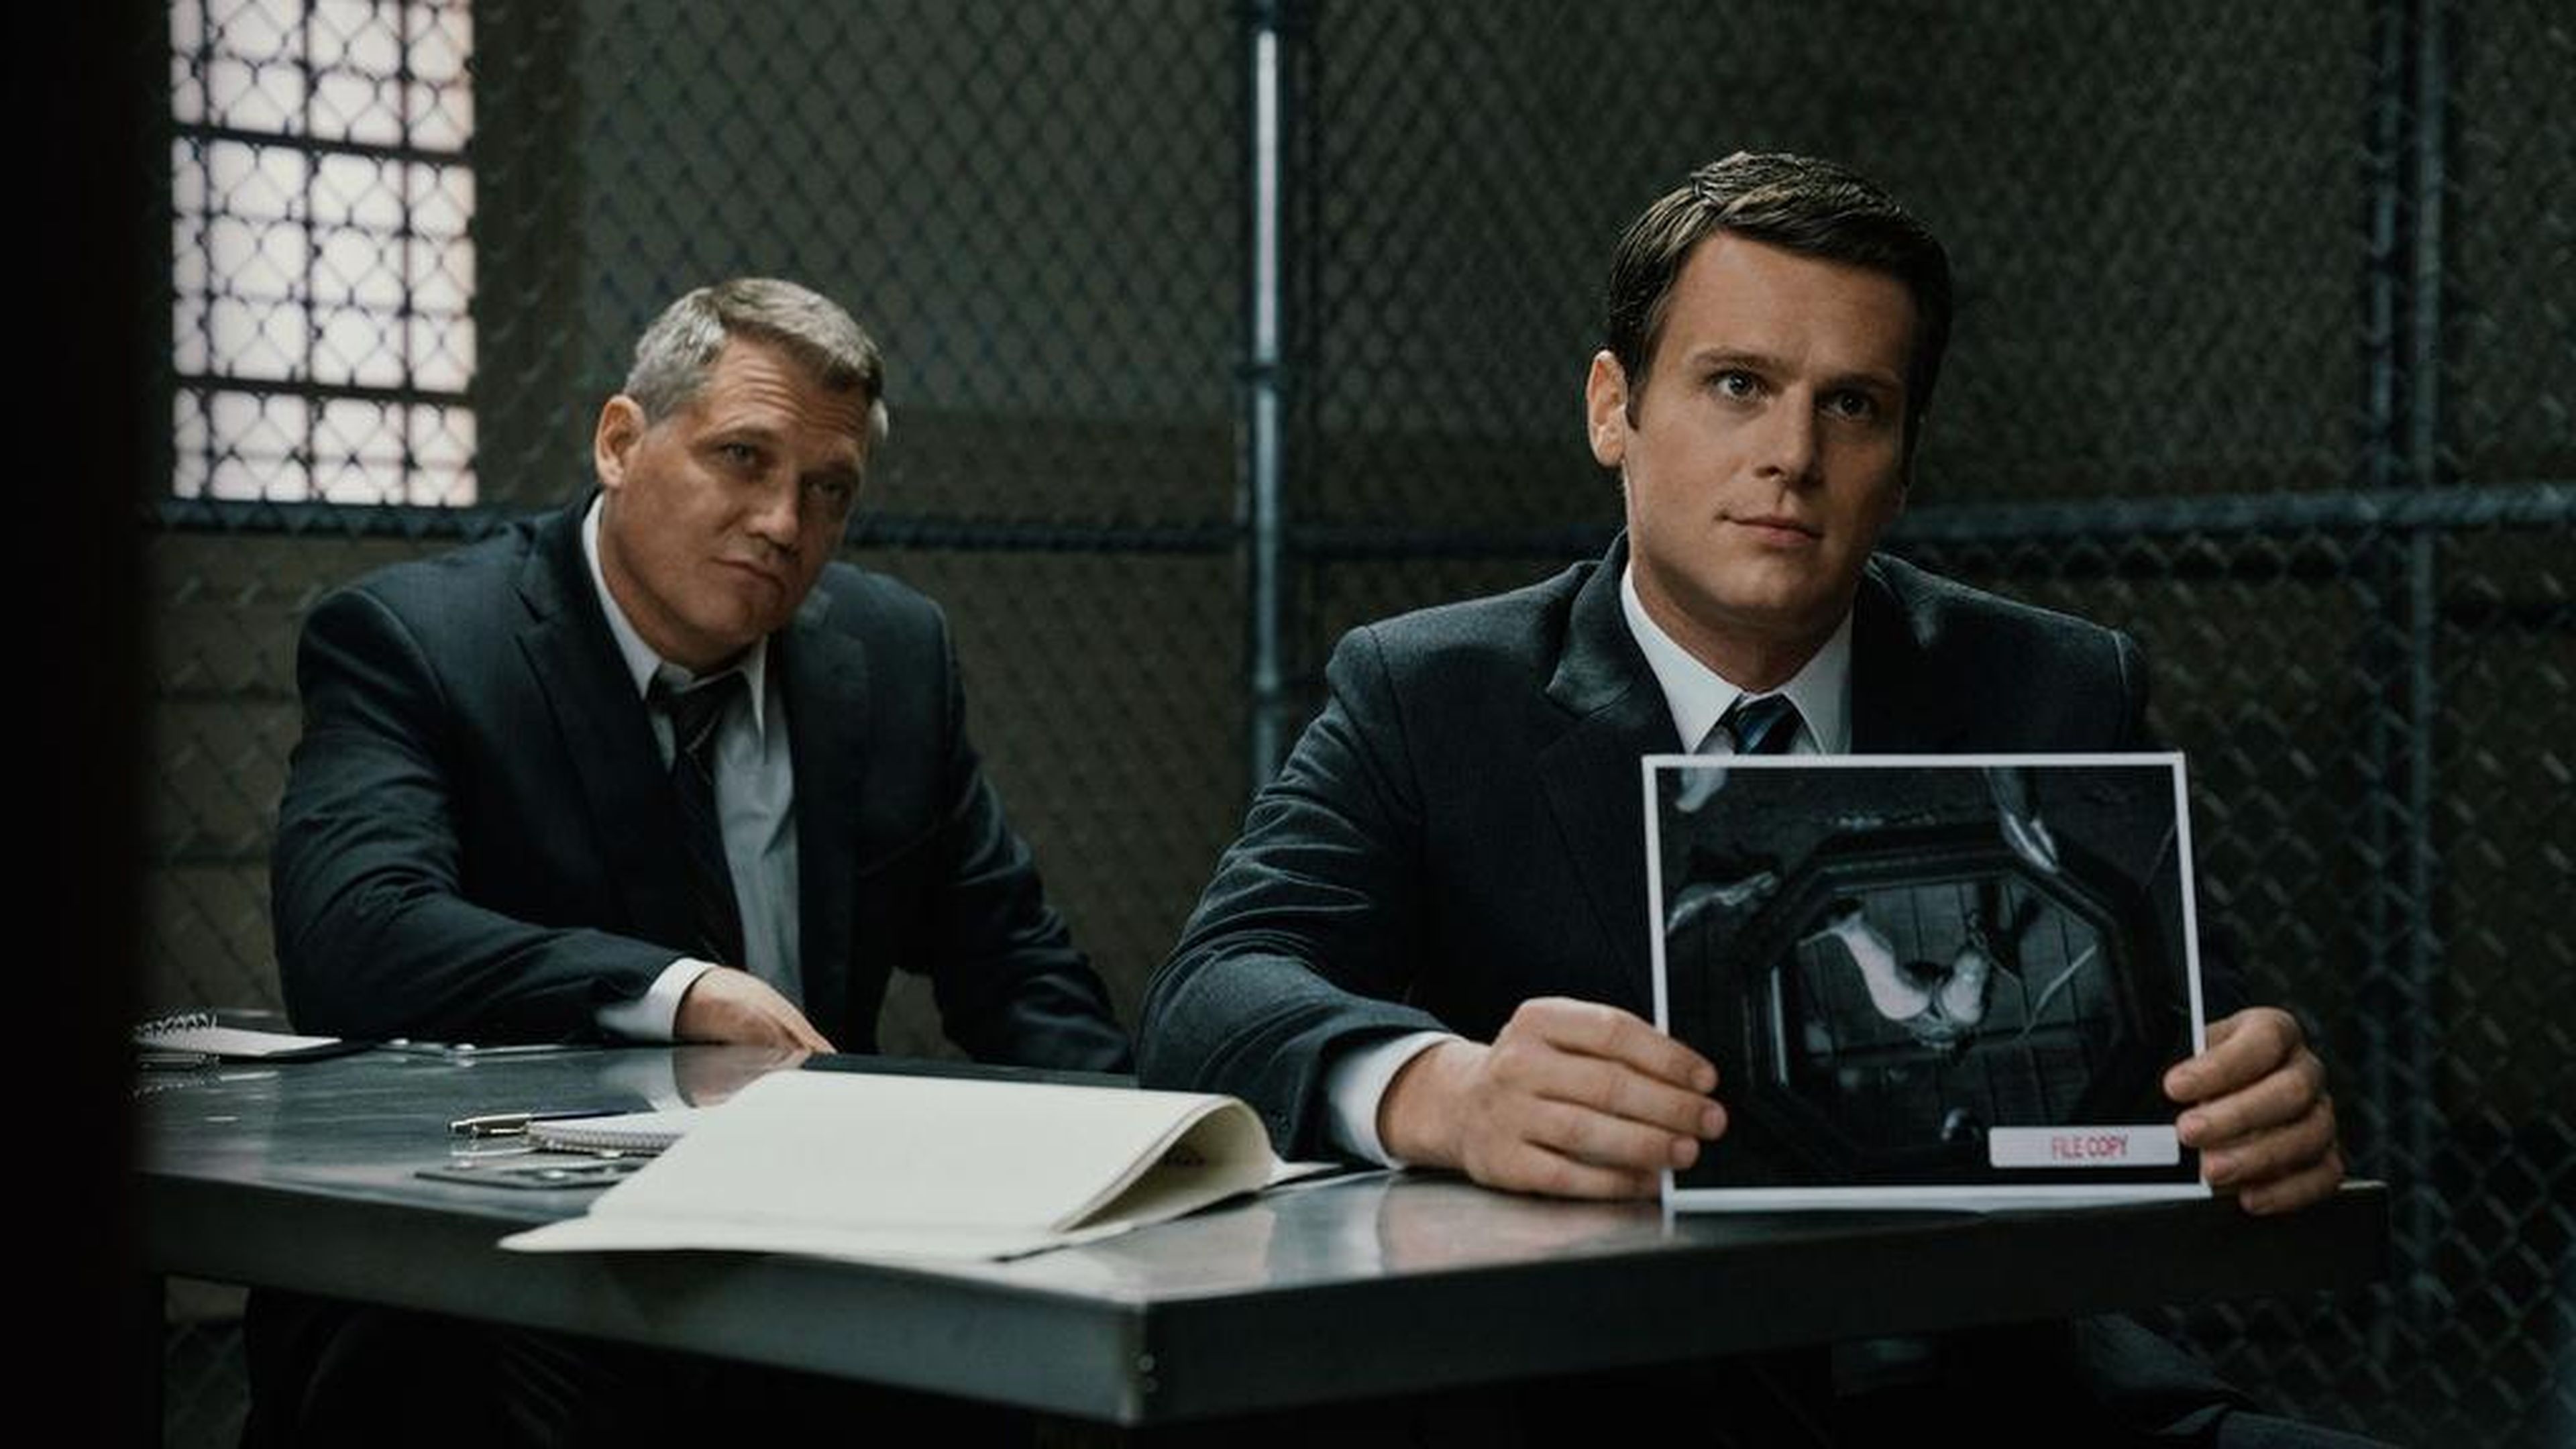 "Mindhunter" is set in the 1970s.